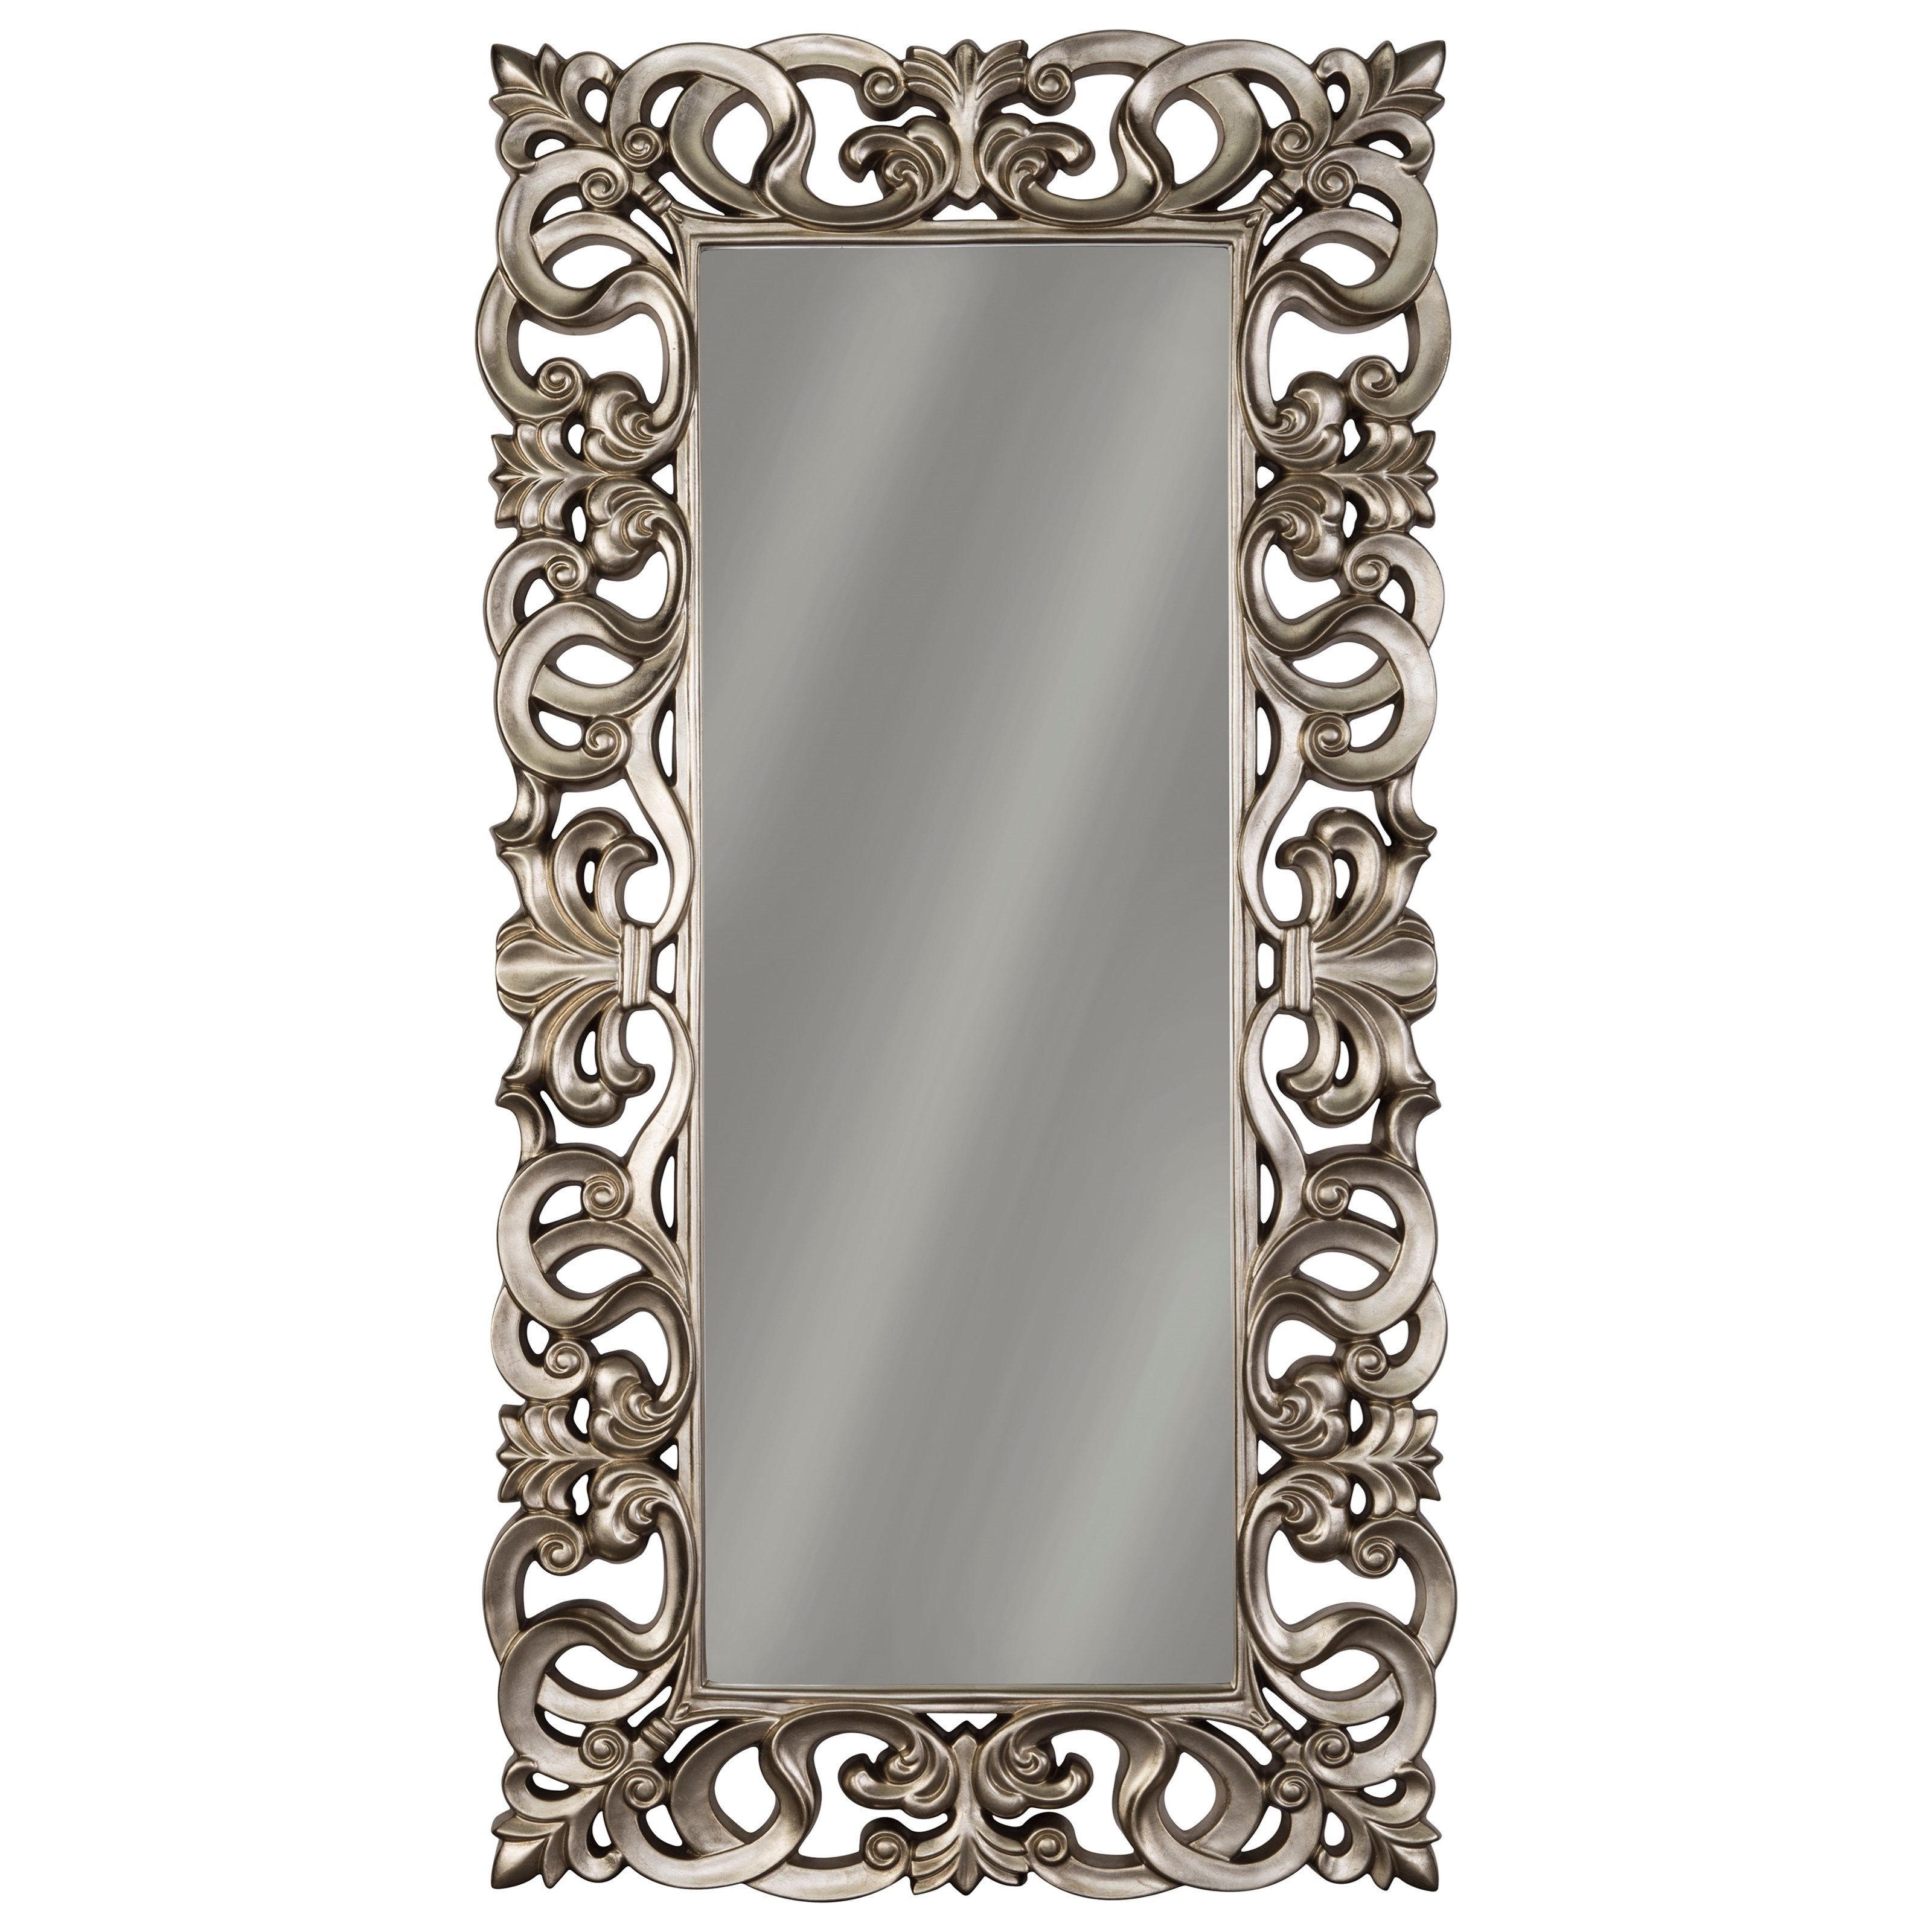 Accent Mirrors Lucia Antique Silver Finish Accent Mirrorsignature  Designashley At Becker Furniture World Inside Accent Mirrors (View 1 of 20)